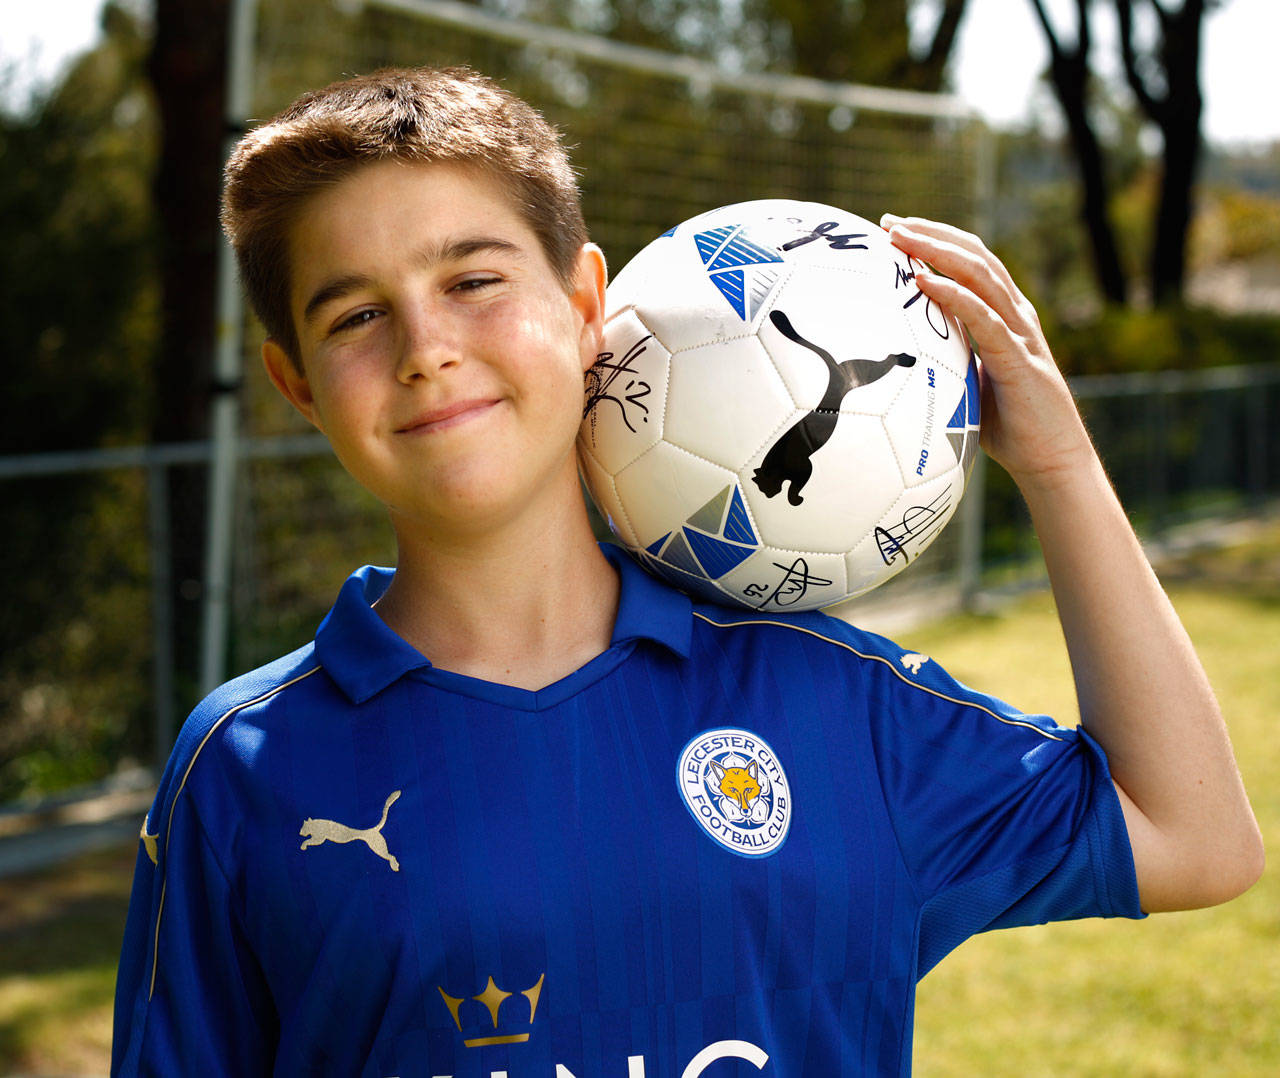 (K.C. Alfred/San Diego Union-Tribune) Travis Hackett, 13, a soccer player and die-hard Leicester City fan, was diagnosed with T-cell acute lymphocytic leukemia in 2014. Hackett recently took a trip to England to be a special guest of the team, through the Craig Willinger Fund.